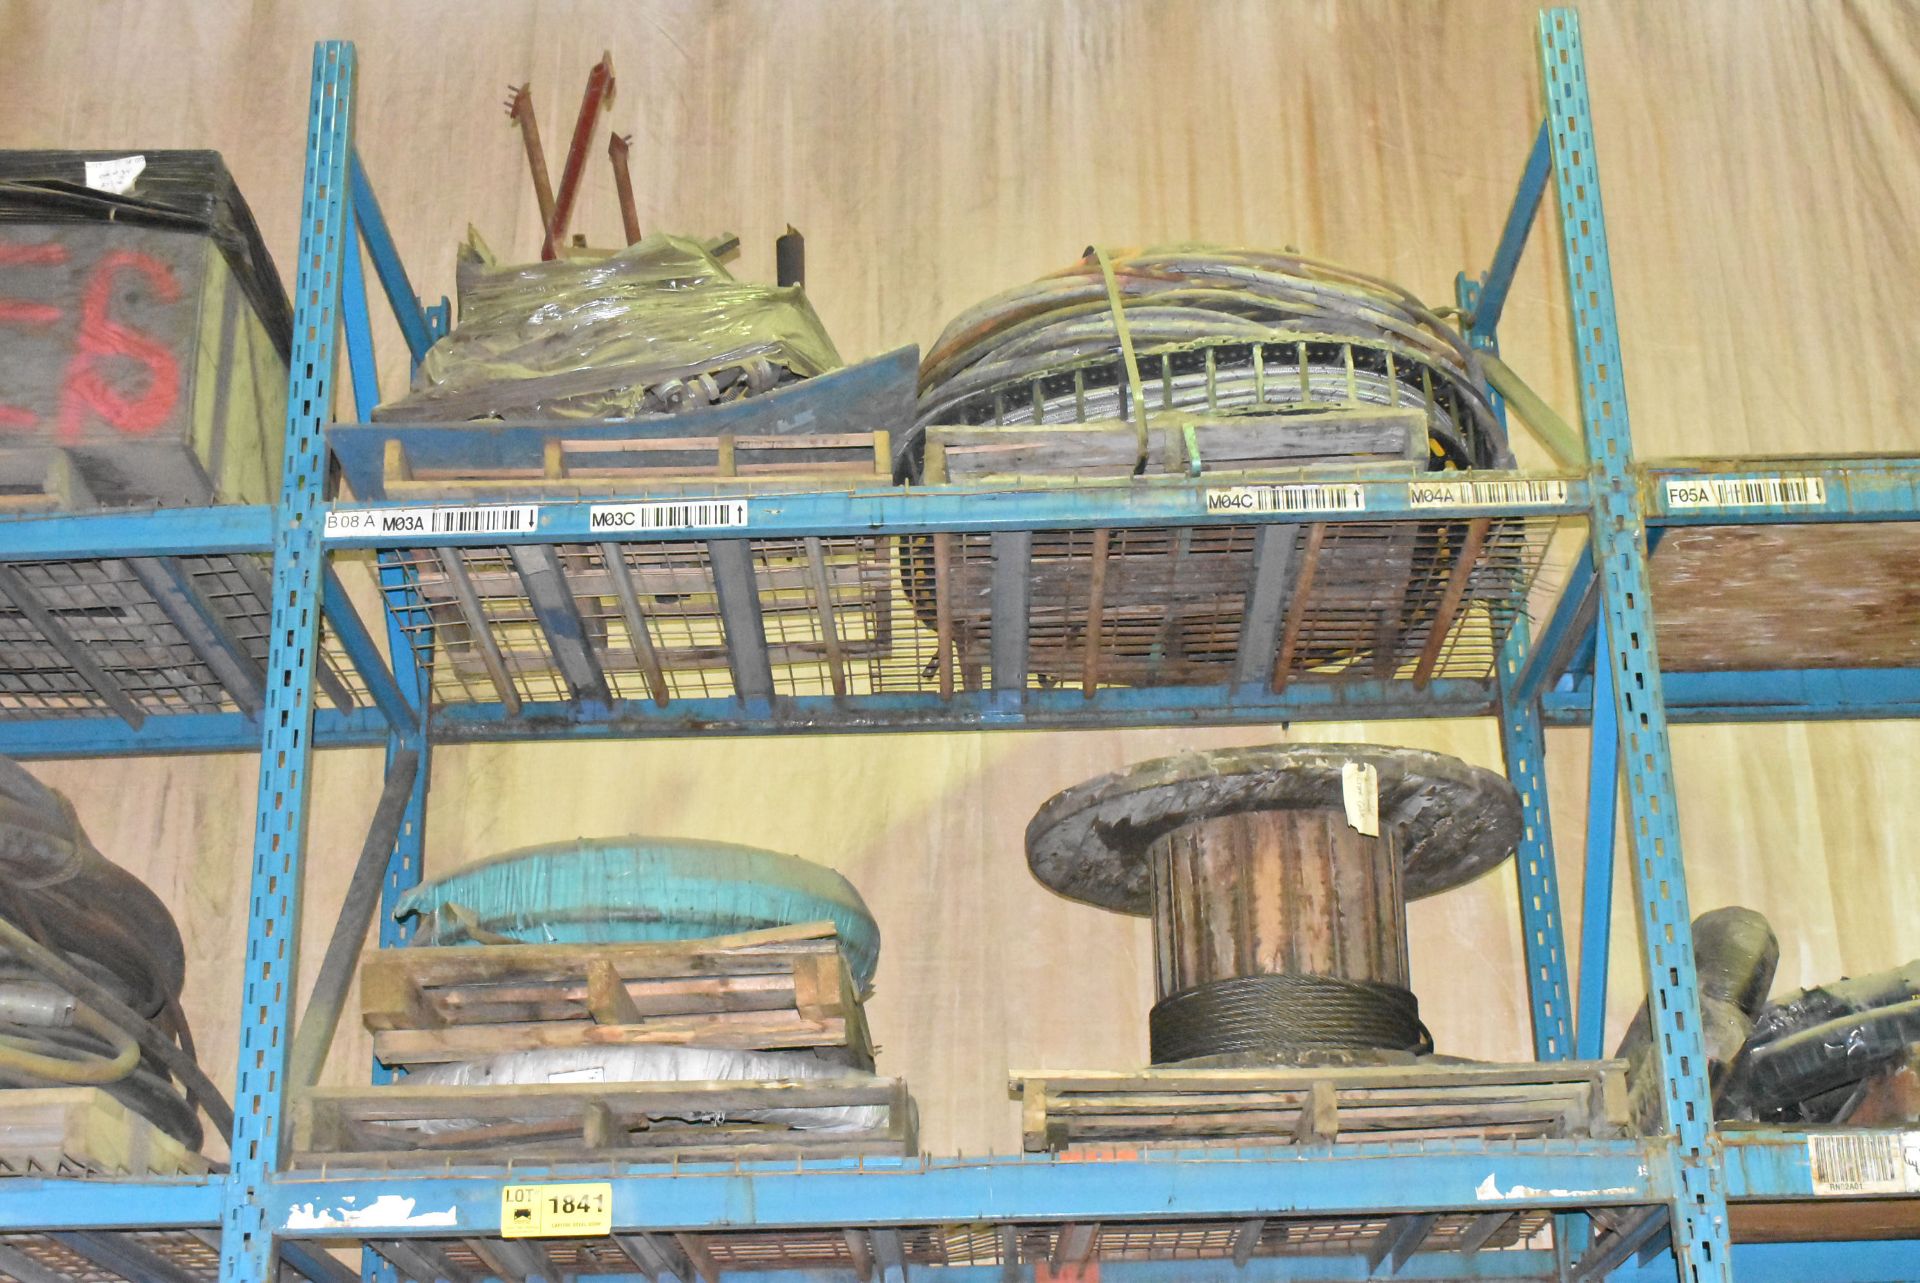 LOT/ CONTENTS OF SHELVES - INCLUDING ELECTRICAL CABLE, HOSE, WIRE ROPE, SURPLUS EQUIPMENT [RIGGING